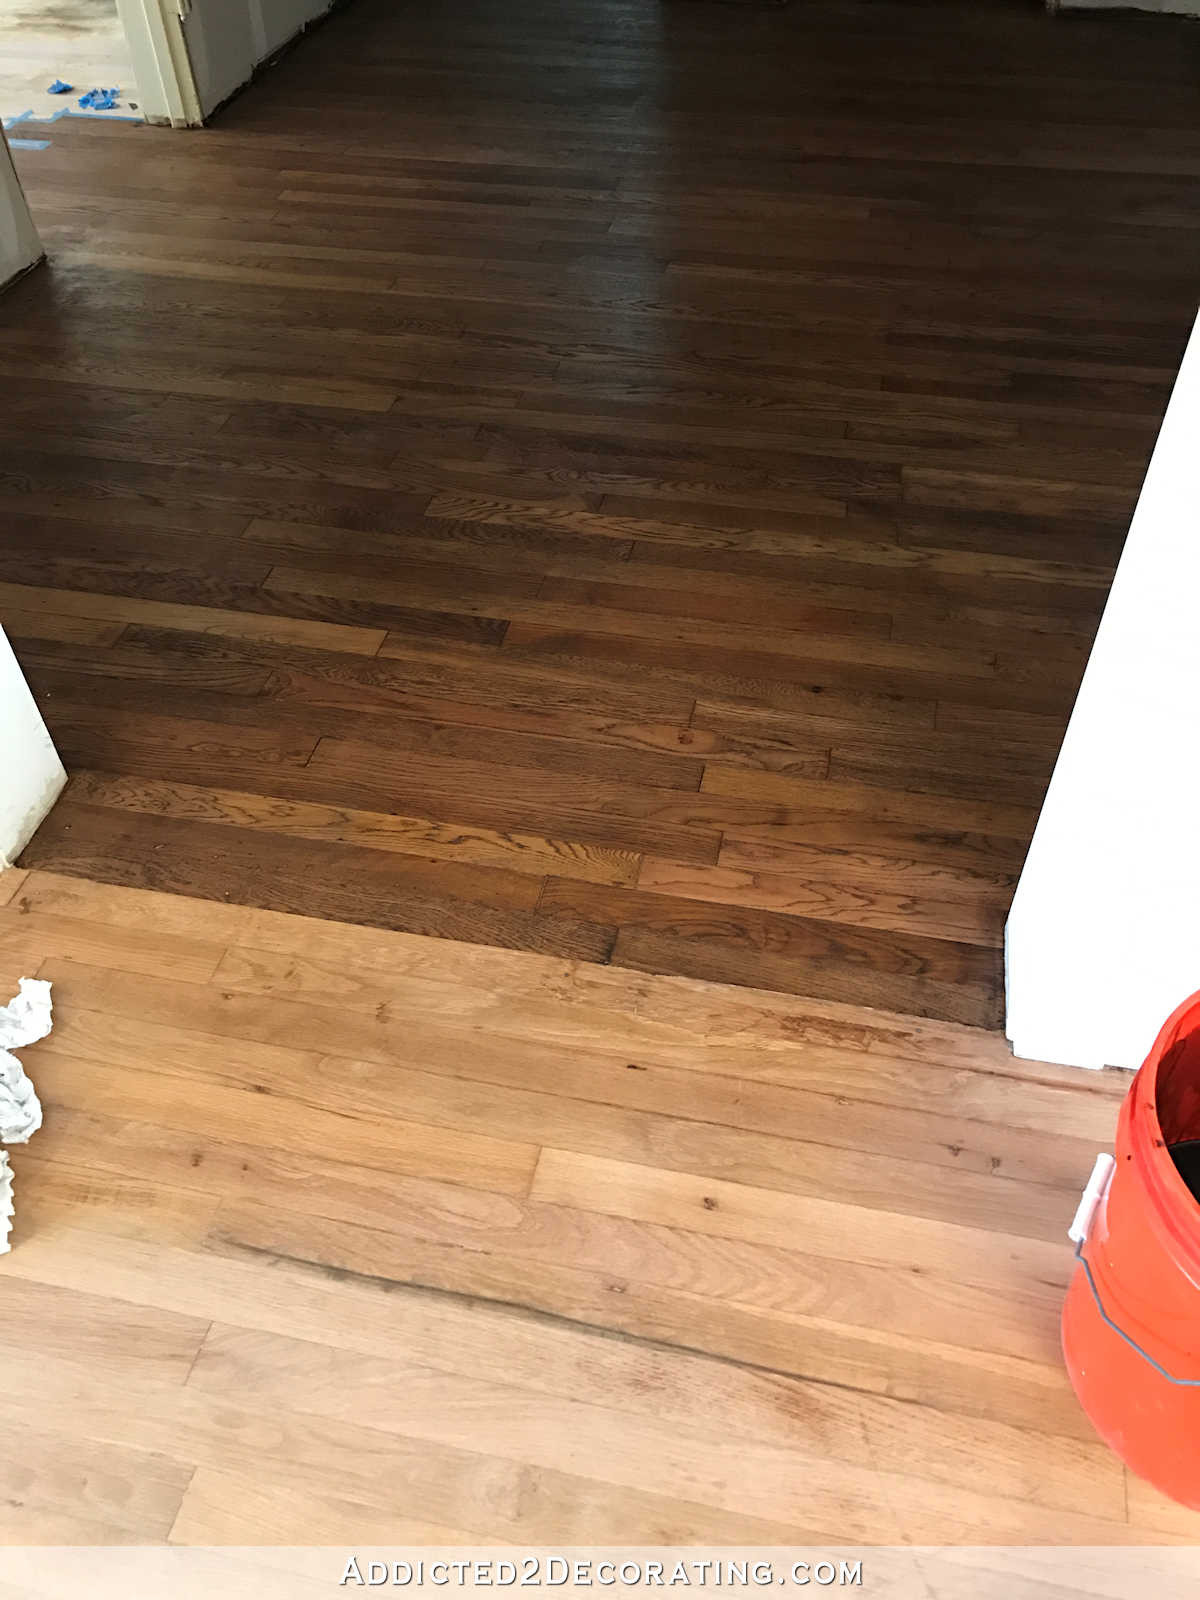 17 Elegant Hardwood Floor Cleaning Services Chicago 2024 free download hardwood floor cleaning services chicago of how to refinish a hardwood floor floor intended for how to refinish a hardwood floor adventures in staining my red oak hardwood floors products